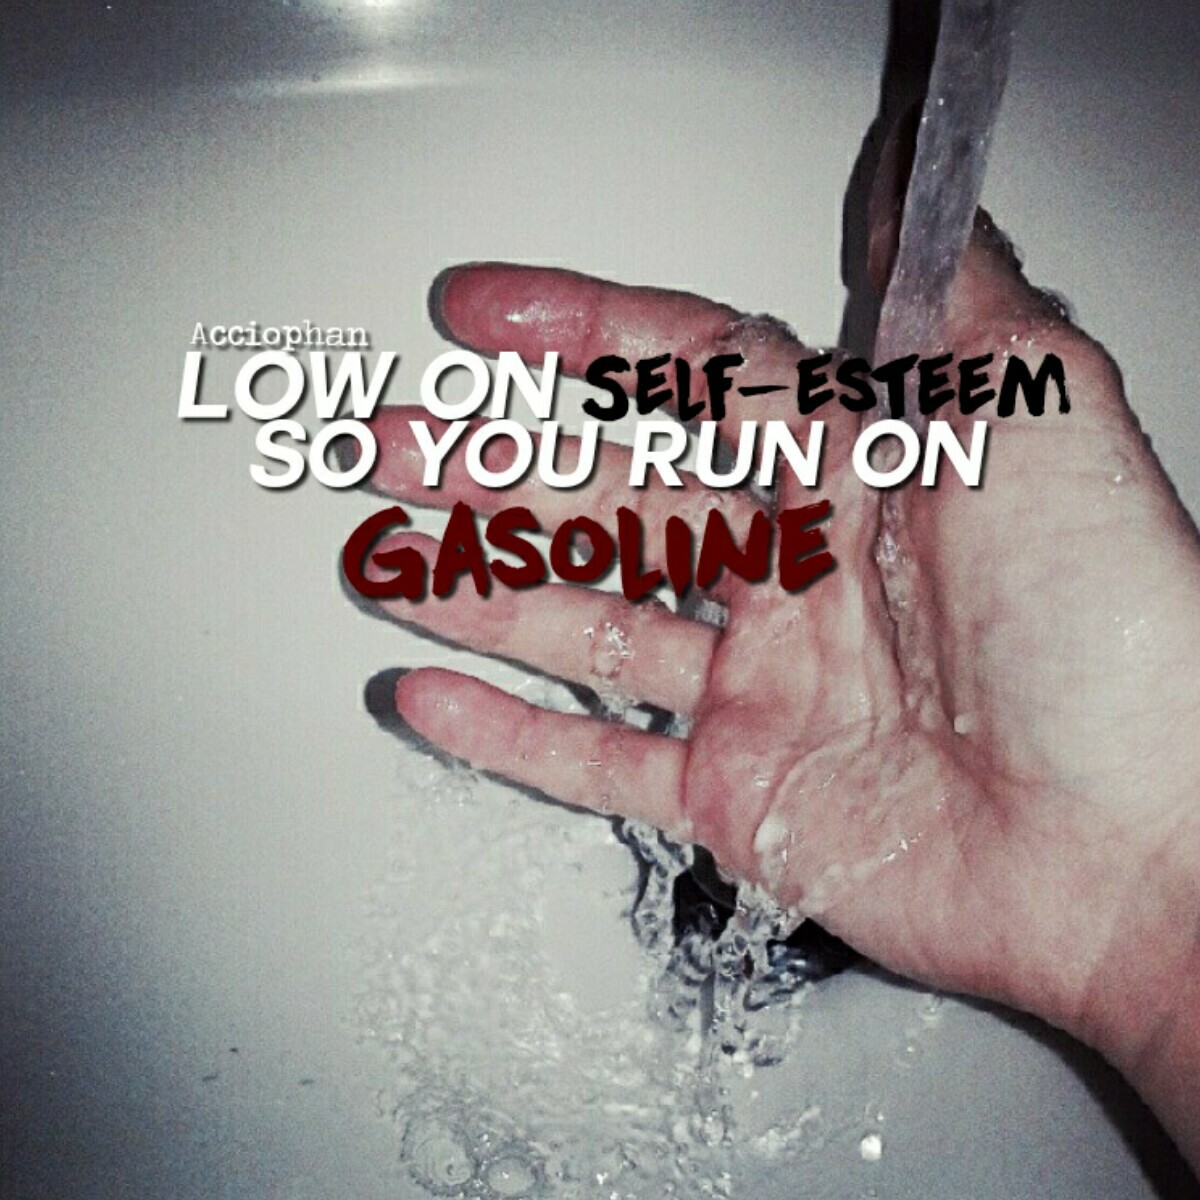 just gonna spam you with gasoline edits